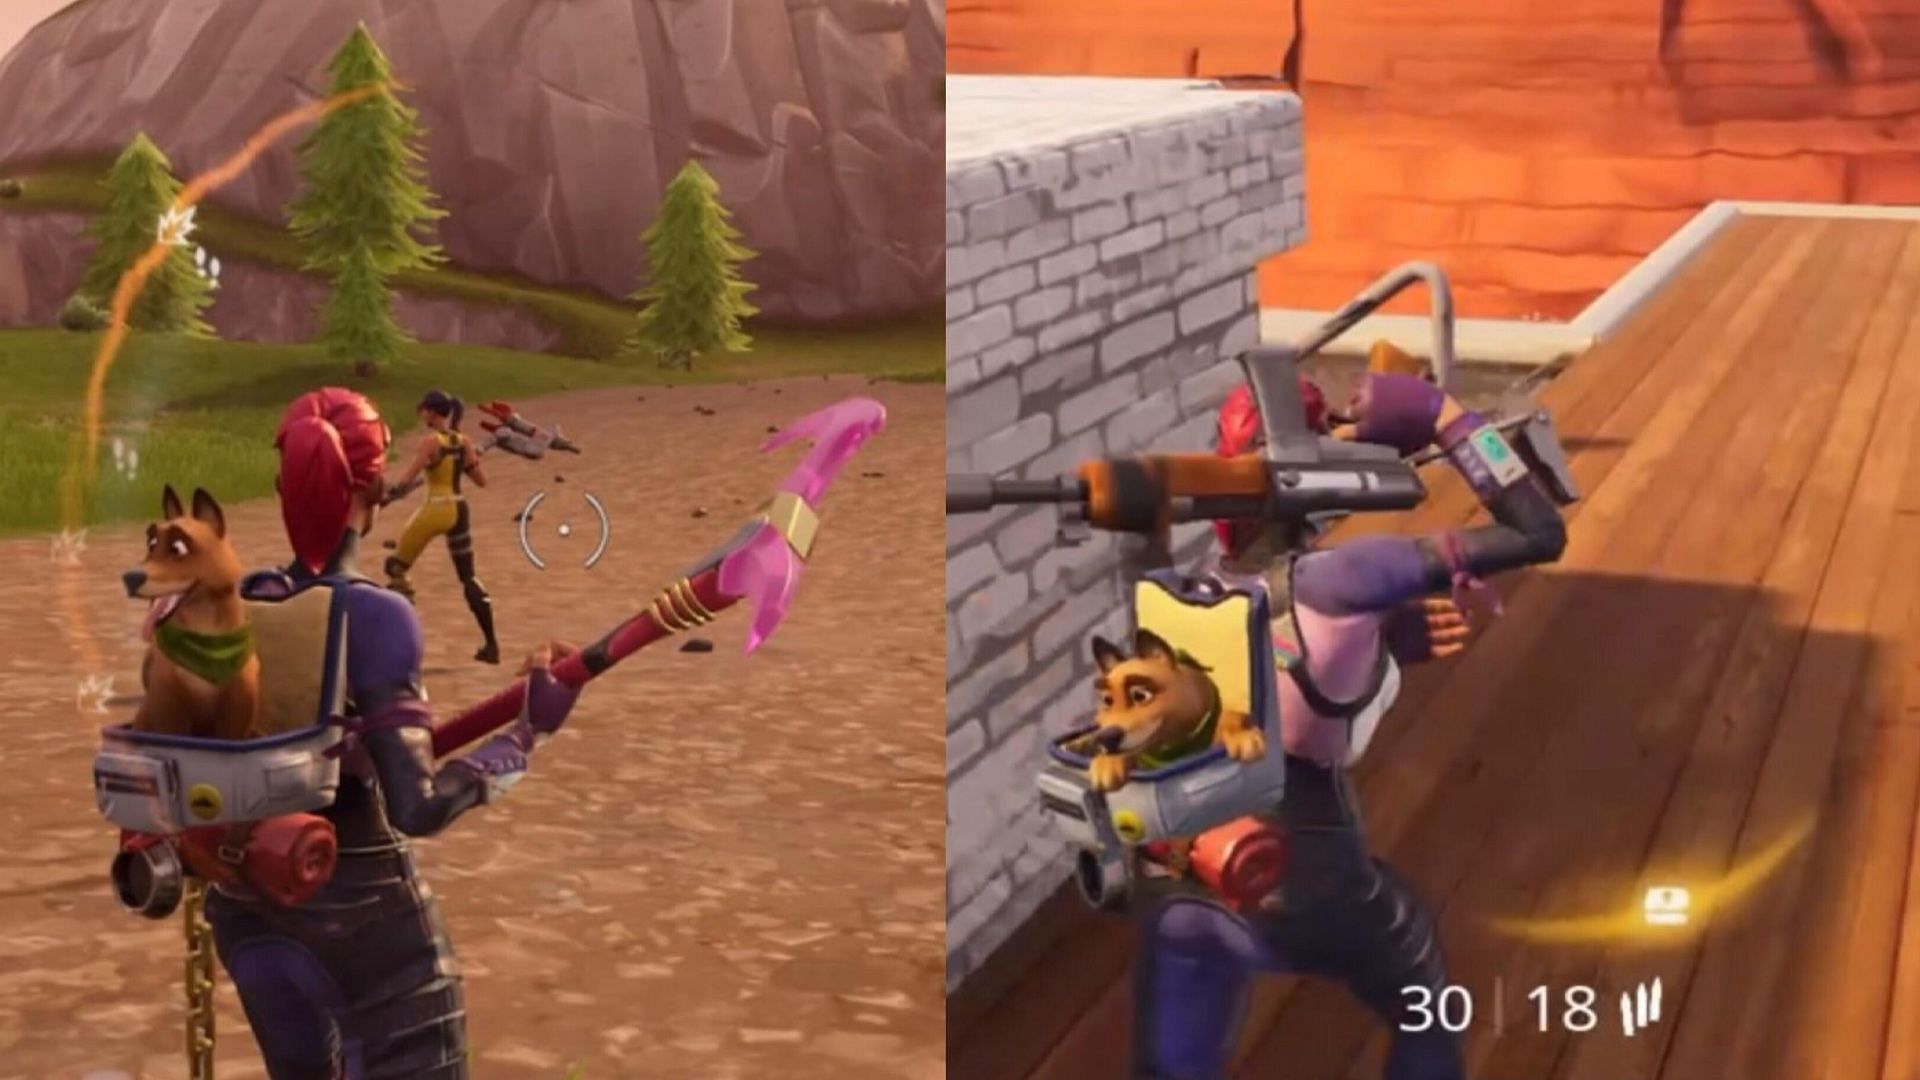 Visualized sound effects have been nerfed in the latest Fortnite update. (Image via Epic Games)